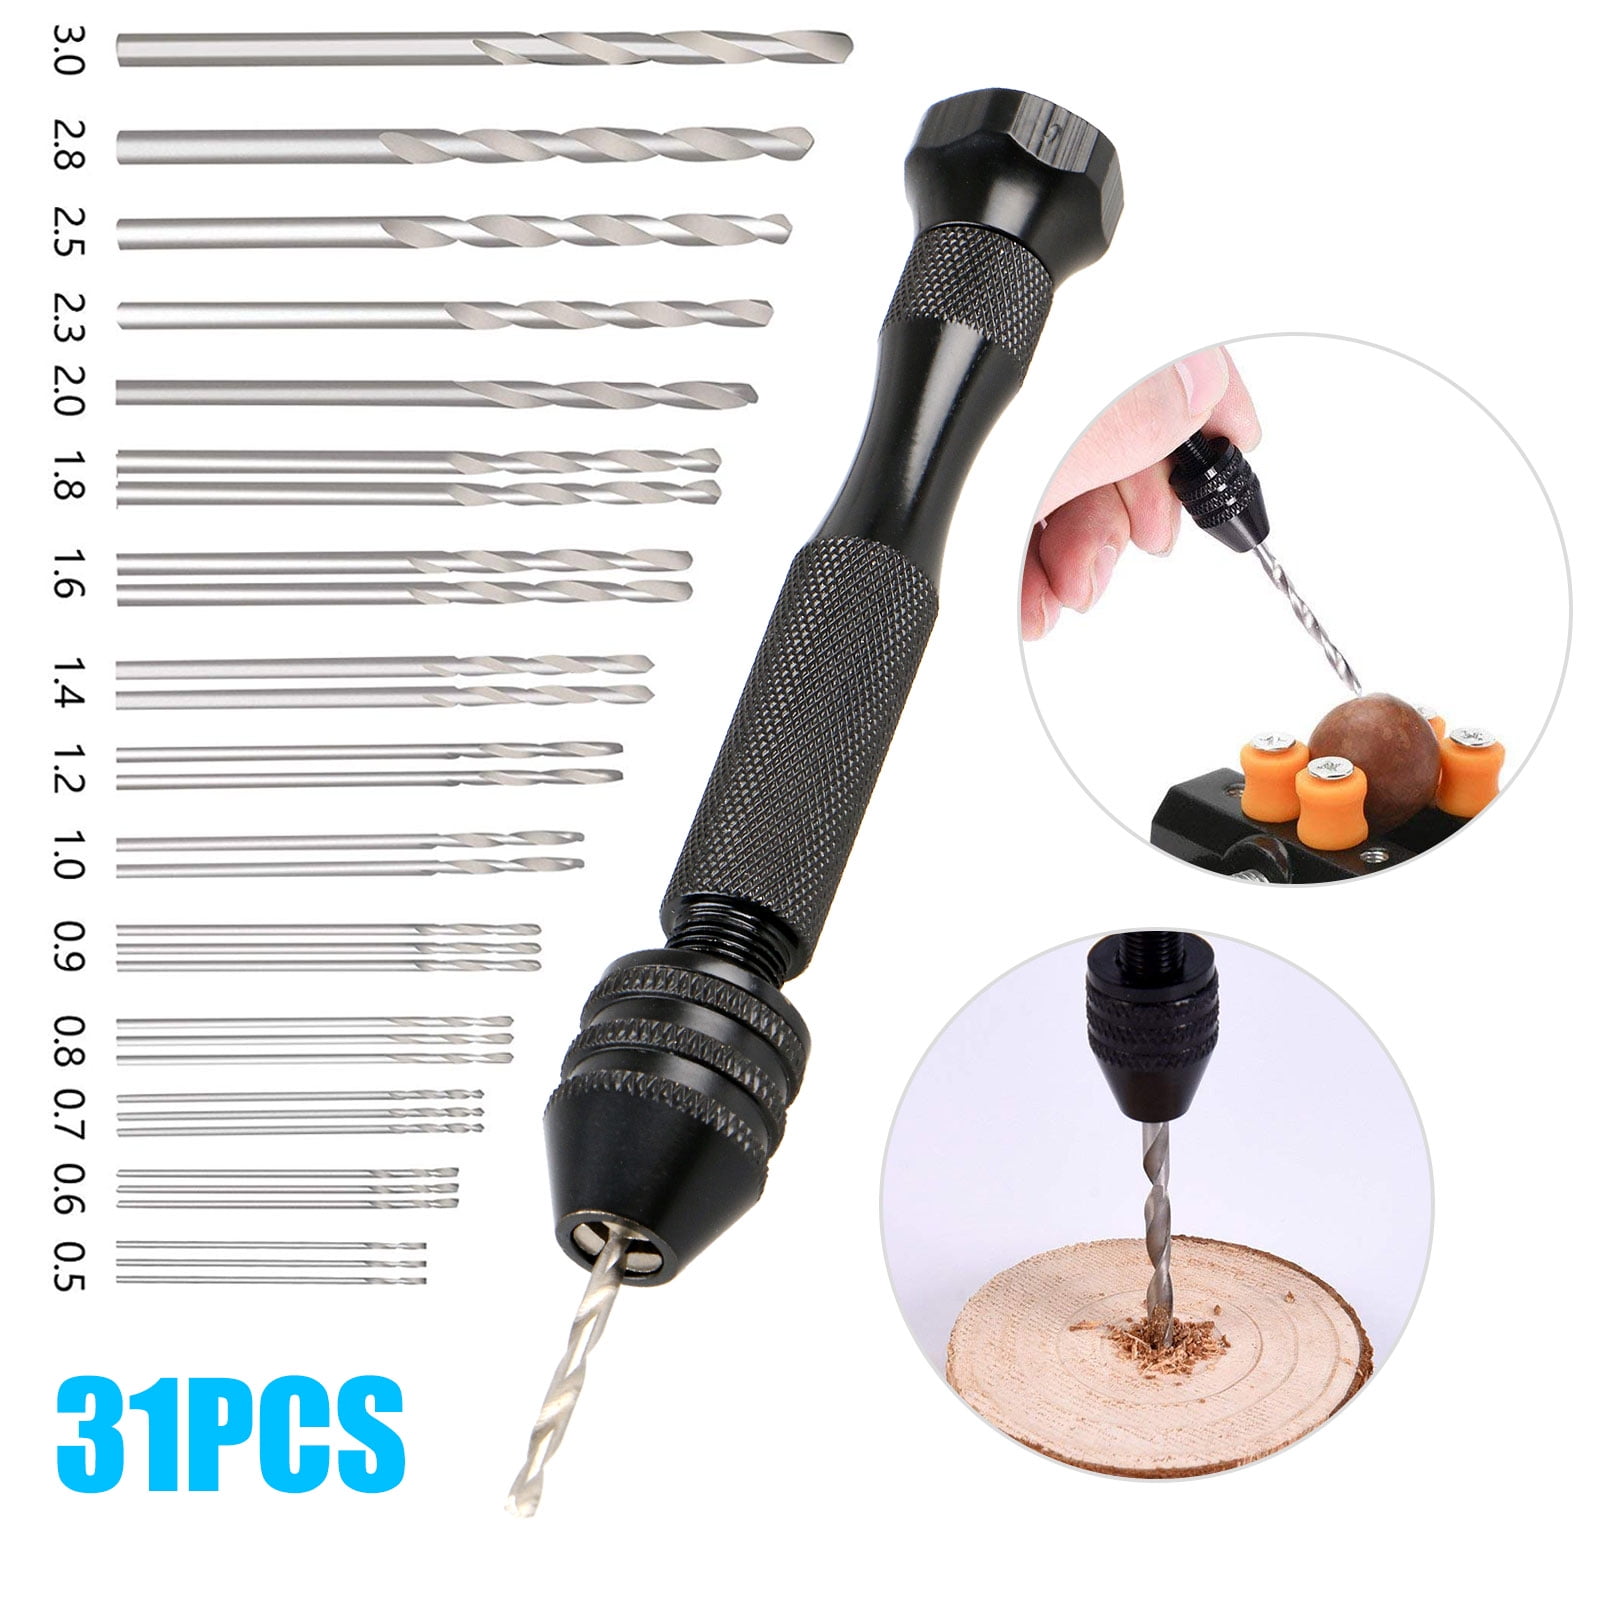 Electronic Assembling and Model Making Andifany Hand Drill Bits Set 31Pcs Hand Drill Set Precision Pin Vise Micro- Twist Drill Bits for Metal Wood Delicate Manual Work DIY Drilling 